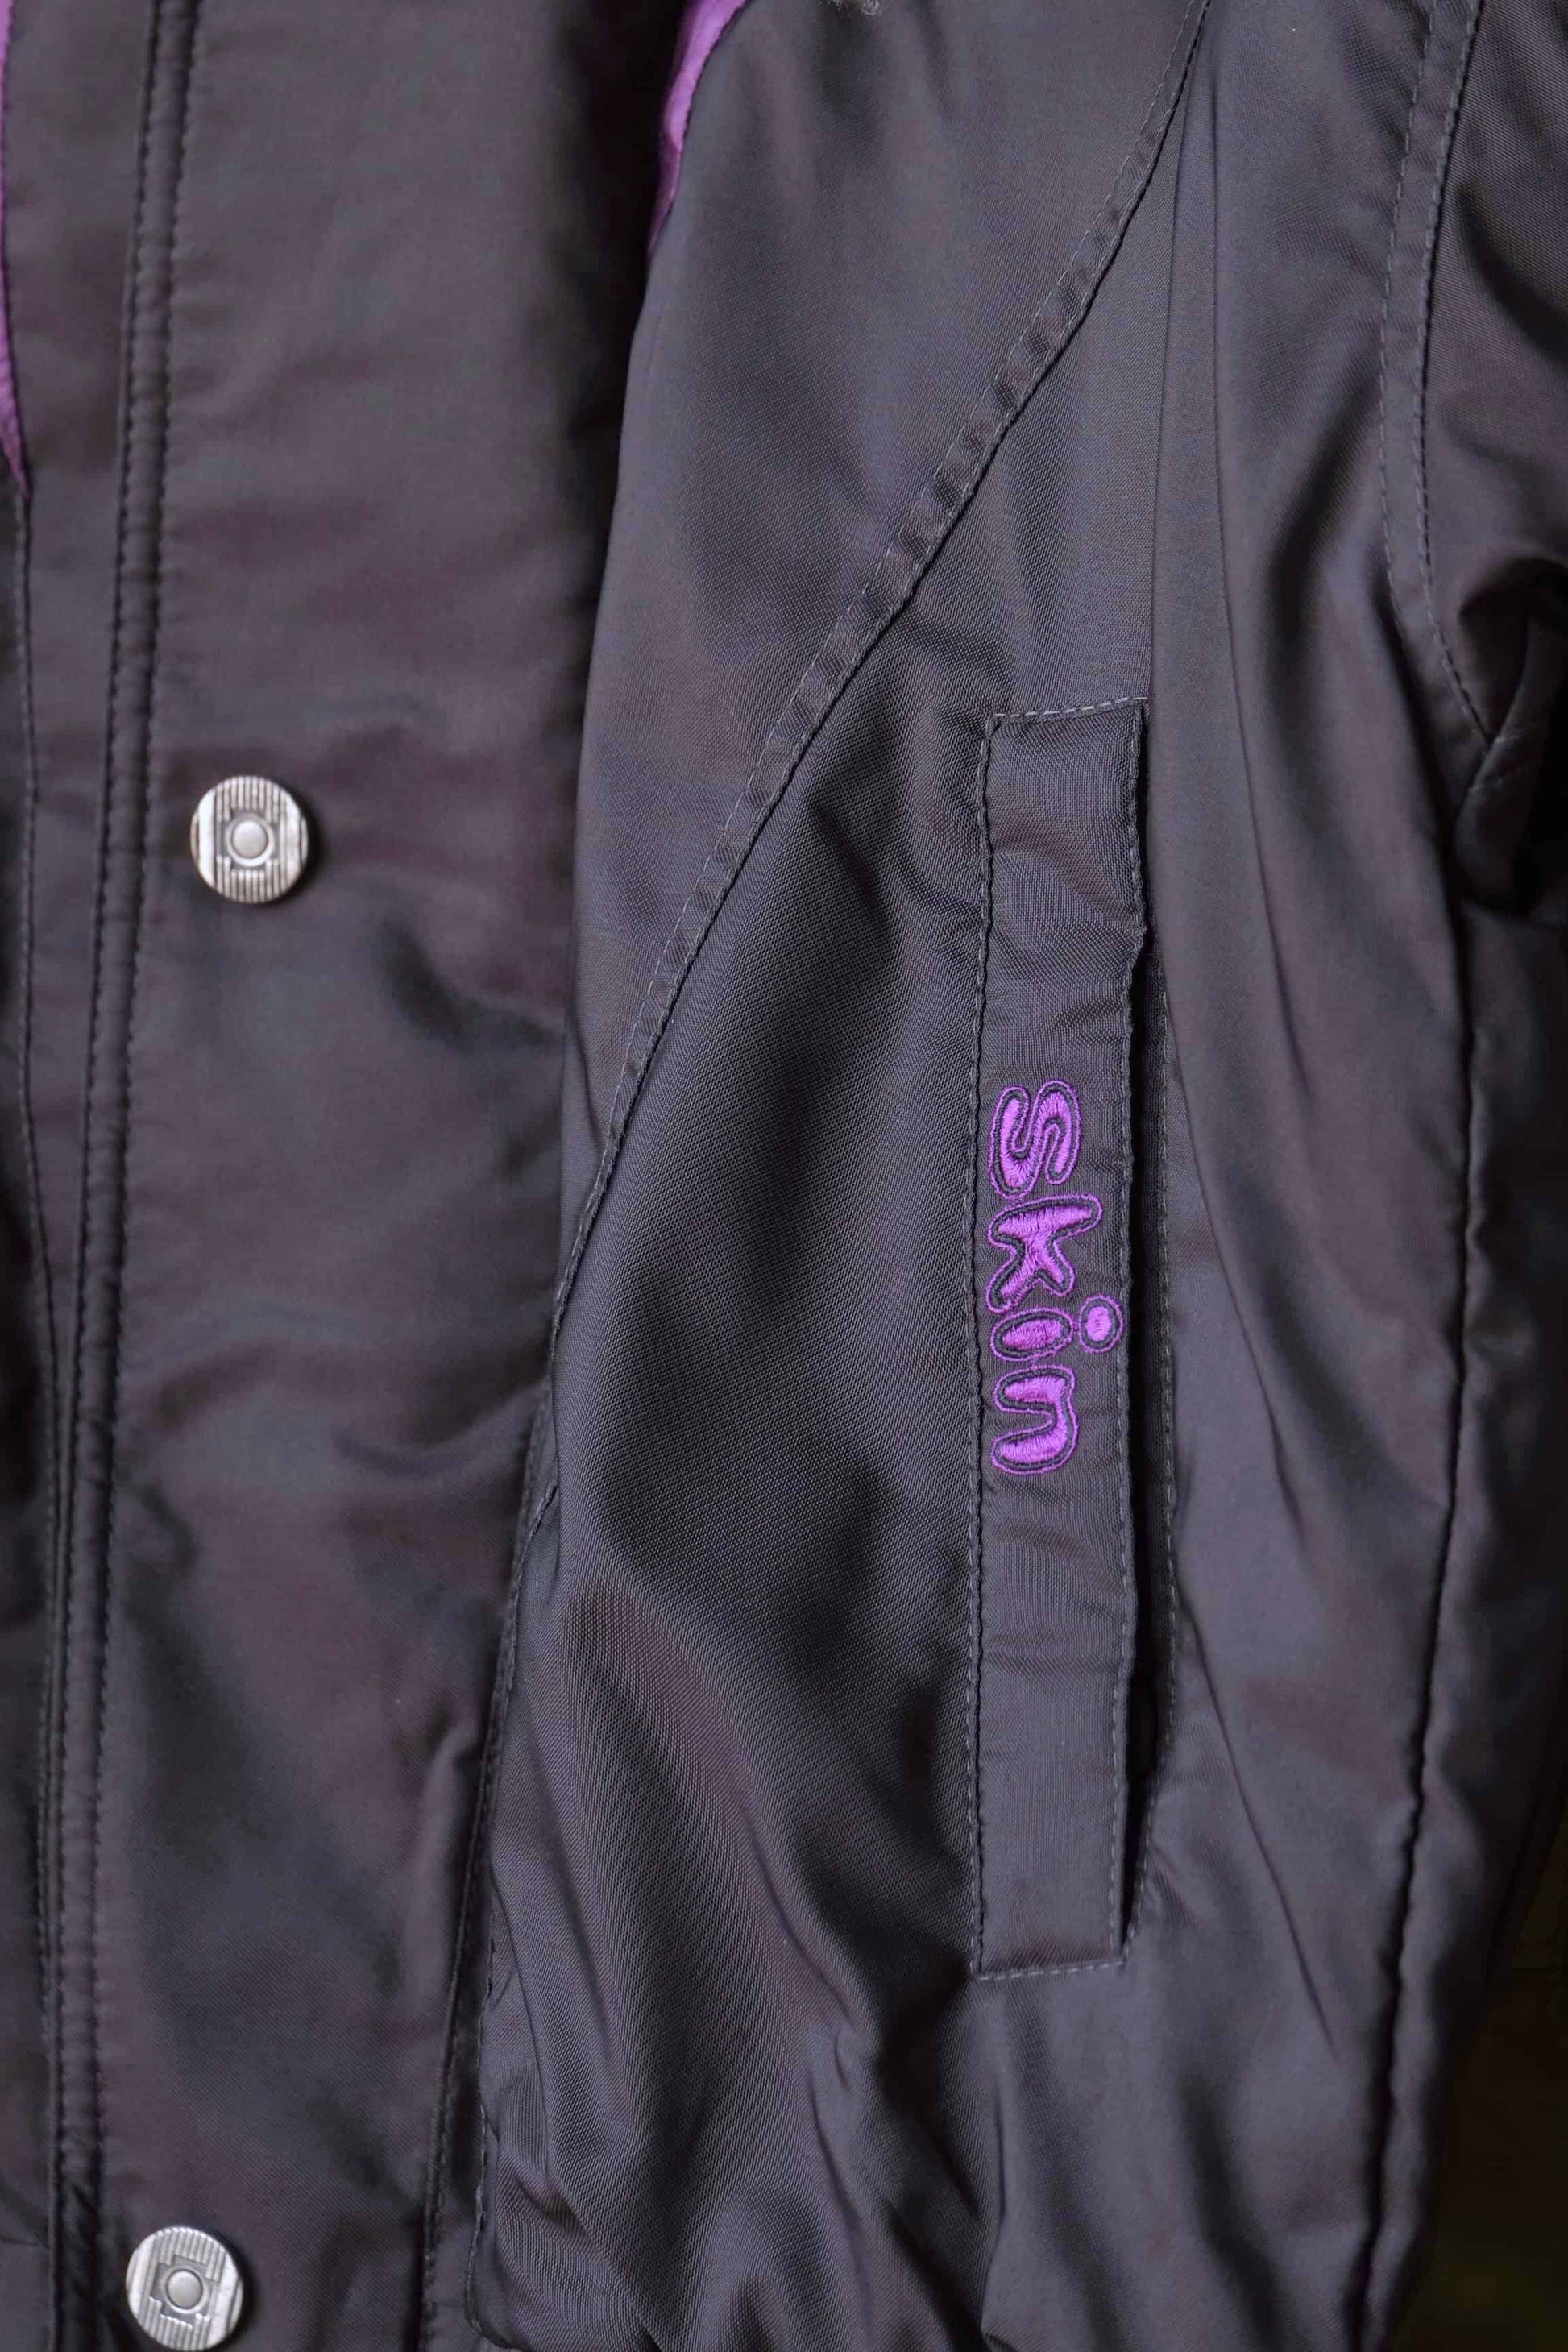 Close up of the stitched Skin logo on the front pocket of the Vintage Men's 90's Ski Jacket in black purple